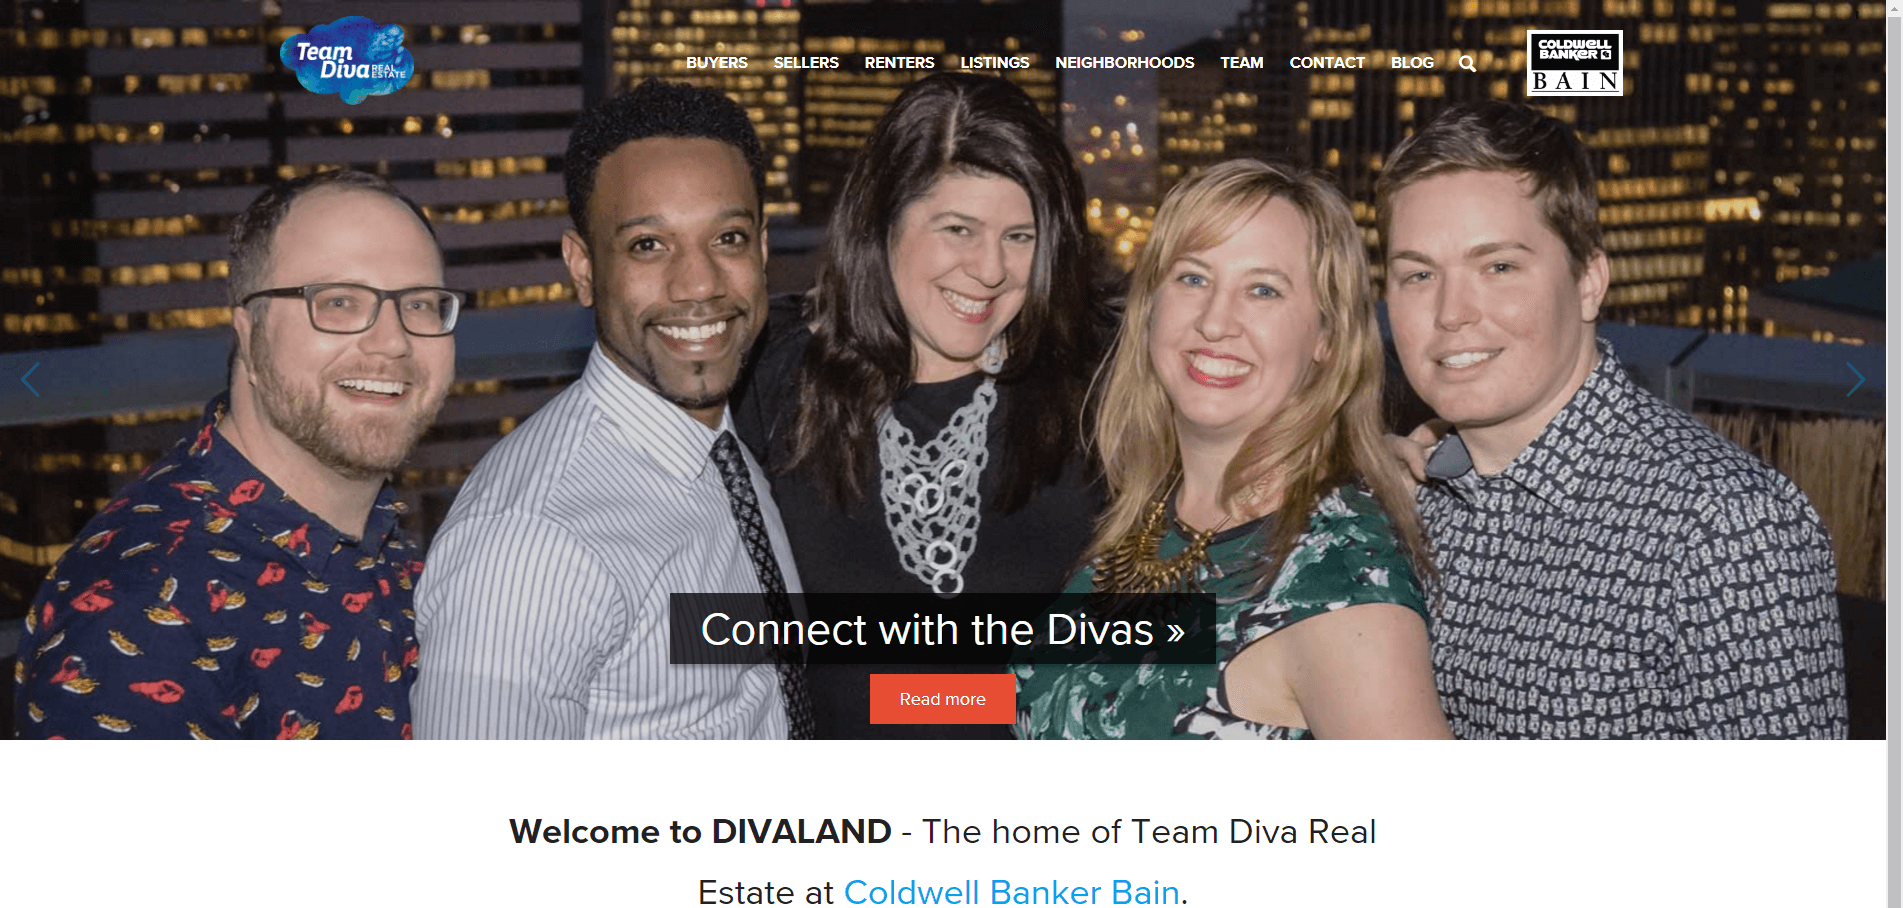  WOW!  This list has 101 of the best real estate websites.  We reviewed and ranked each site, 1-101.  Here's teamdivarealestate.com.  Curious who made the list? 